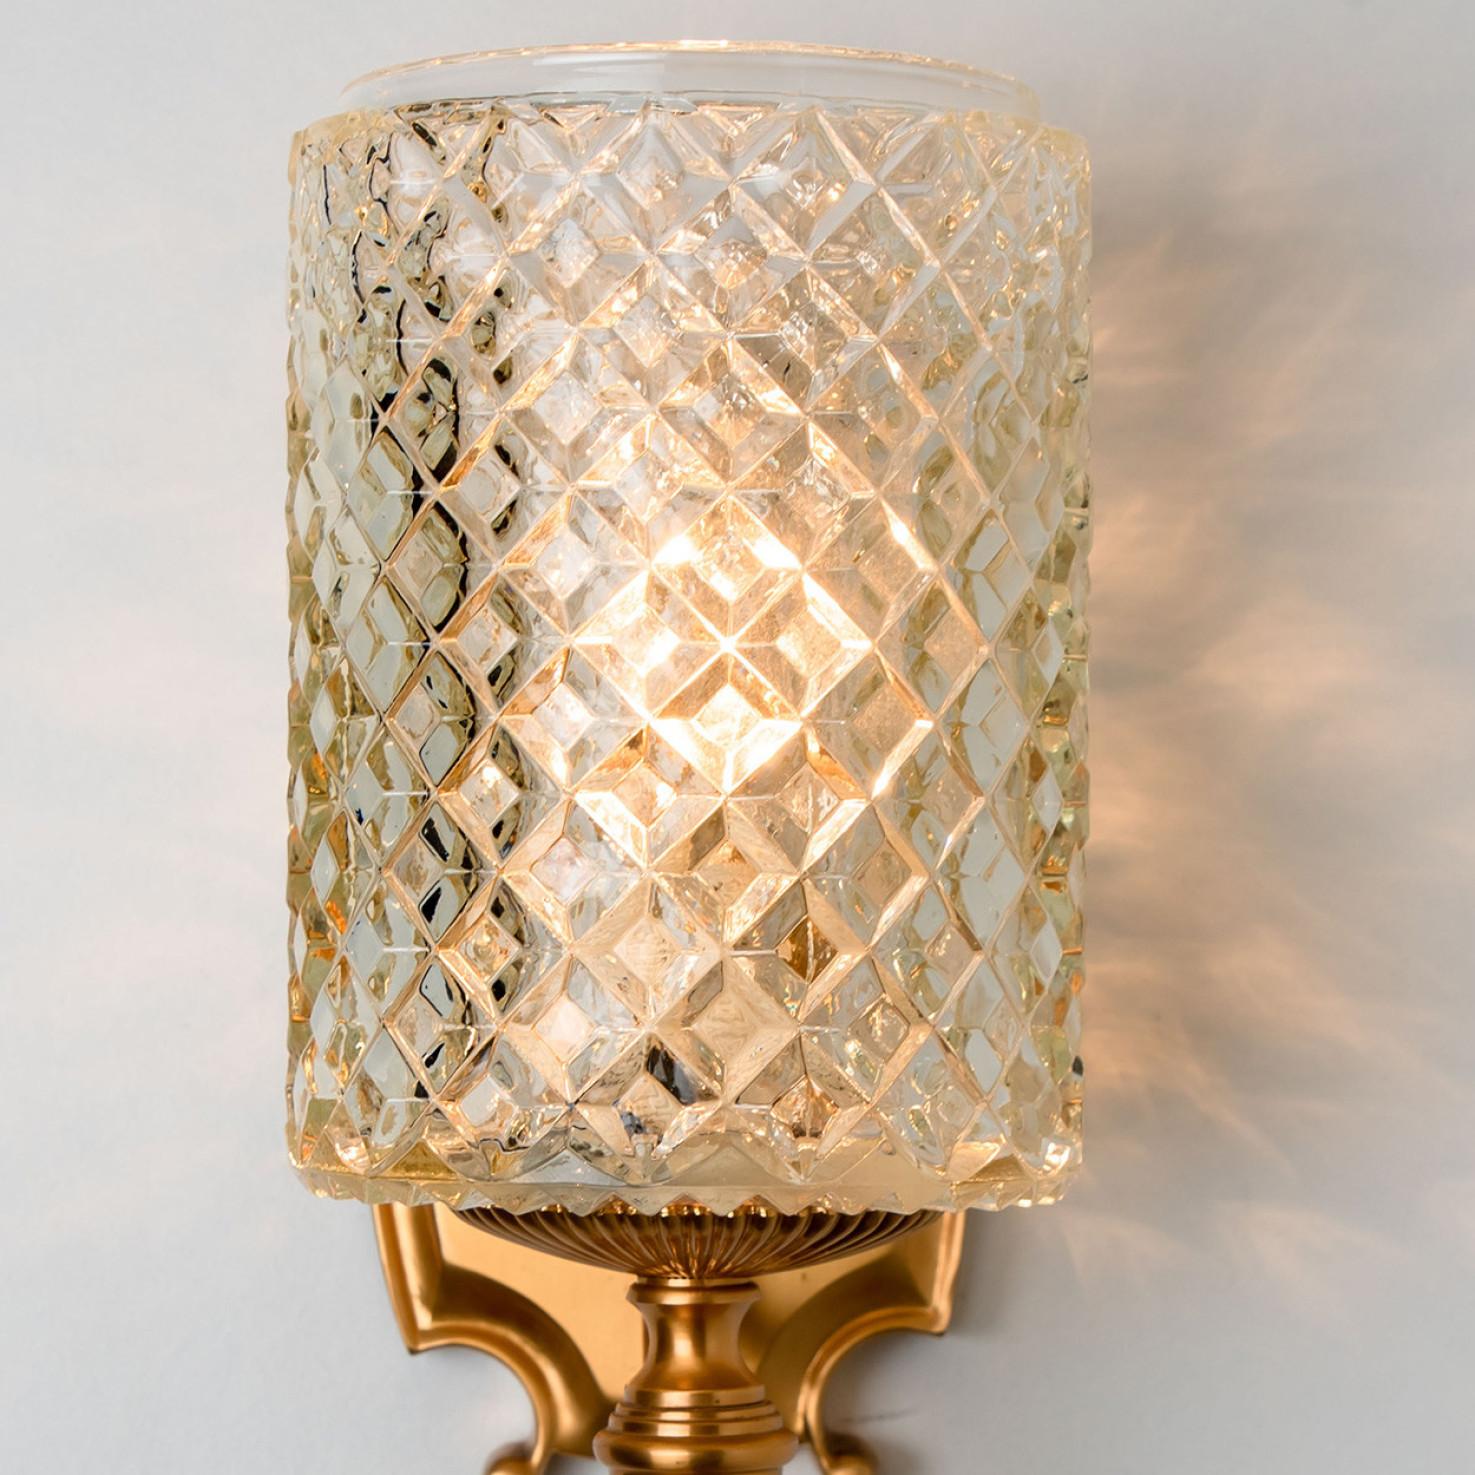 Textured Glass and Brass Wall Lights, Germany, 1960s For Sale 3